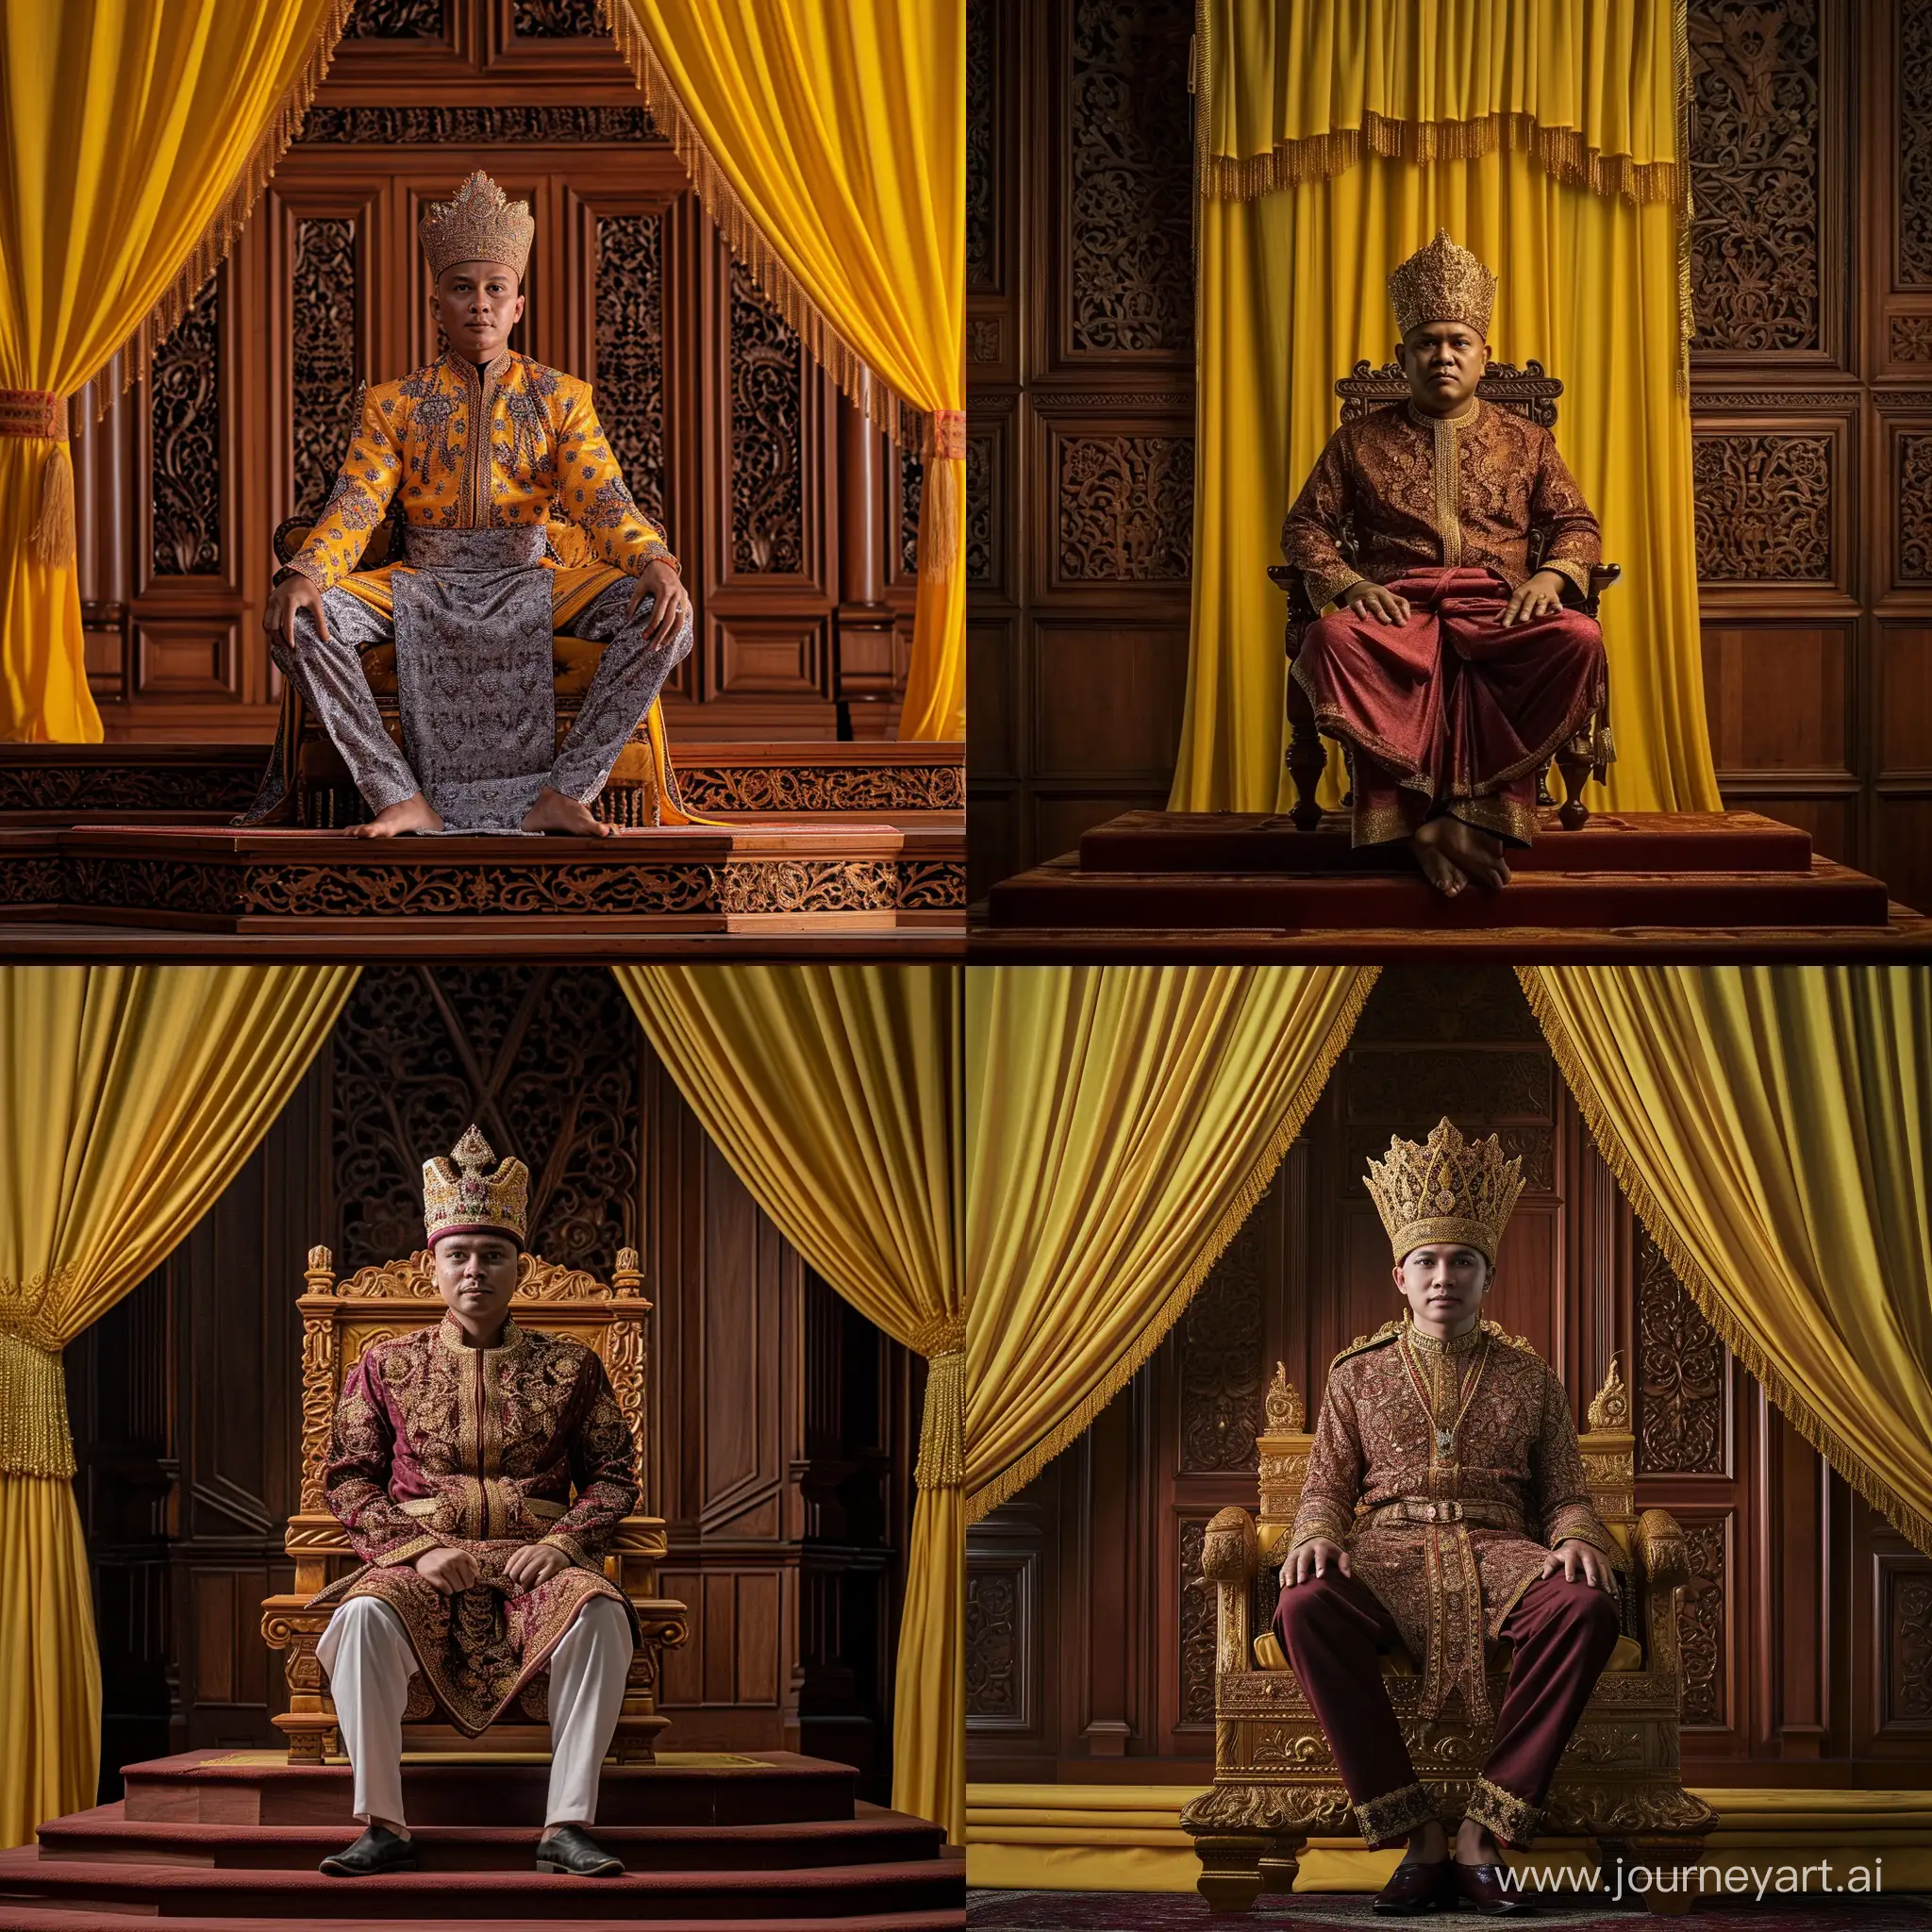 Majestic-Malay-Man-in-Traditional-Royal-Attire-on-Ornate-Throne